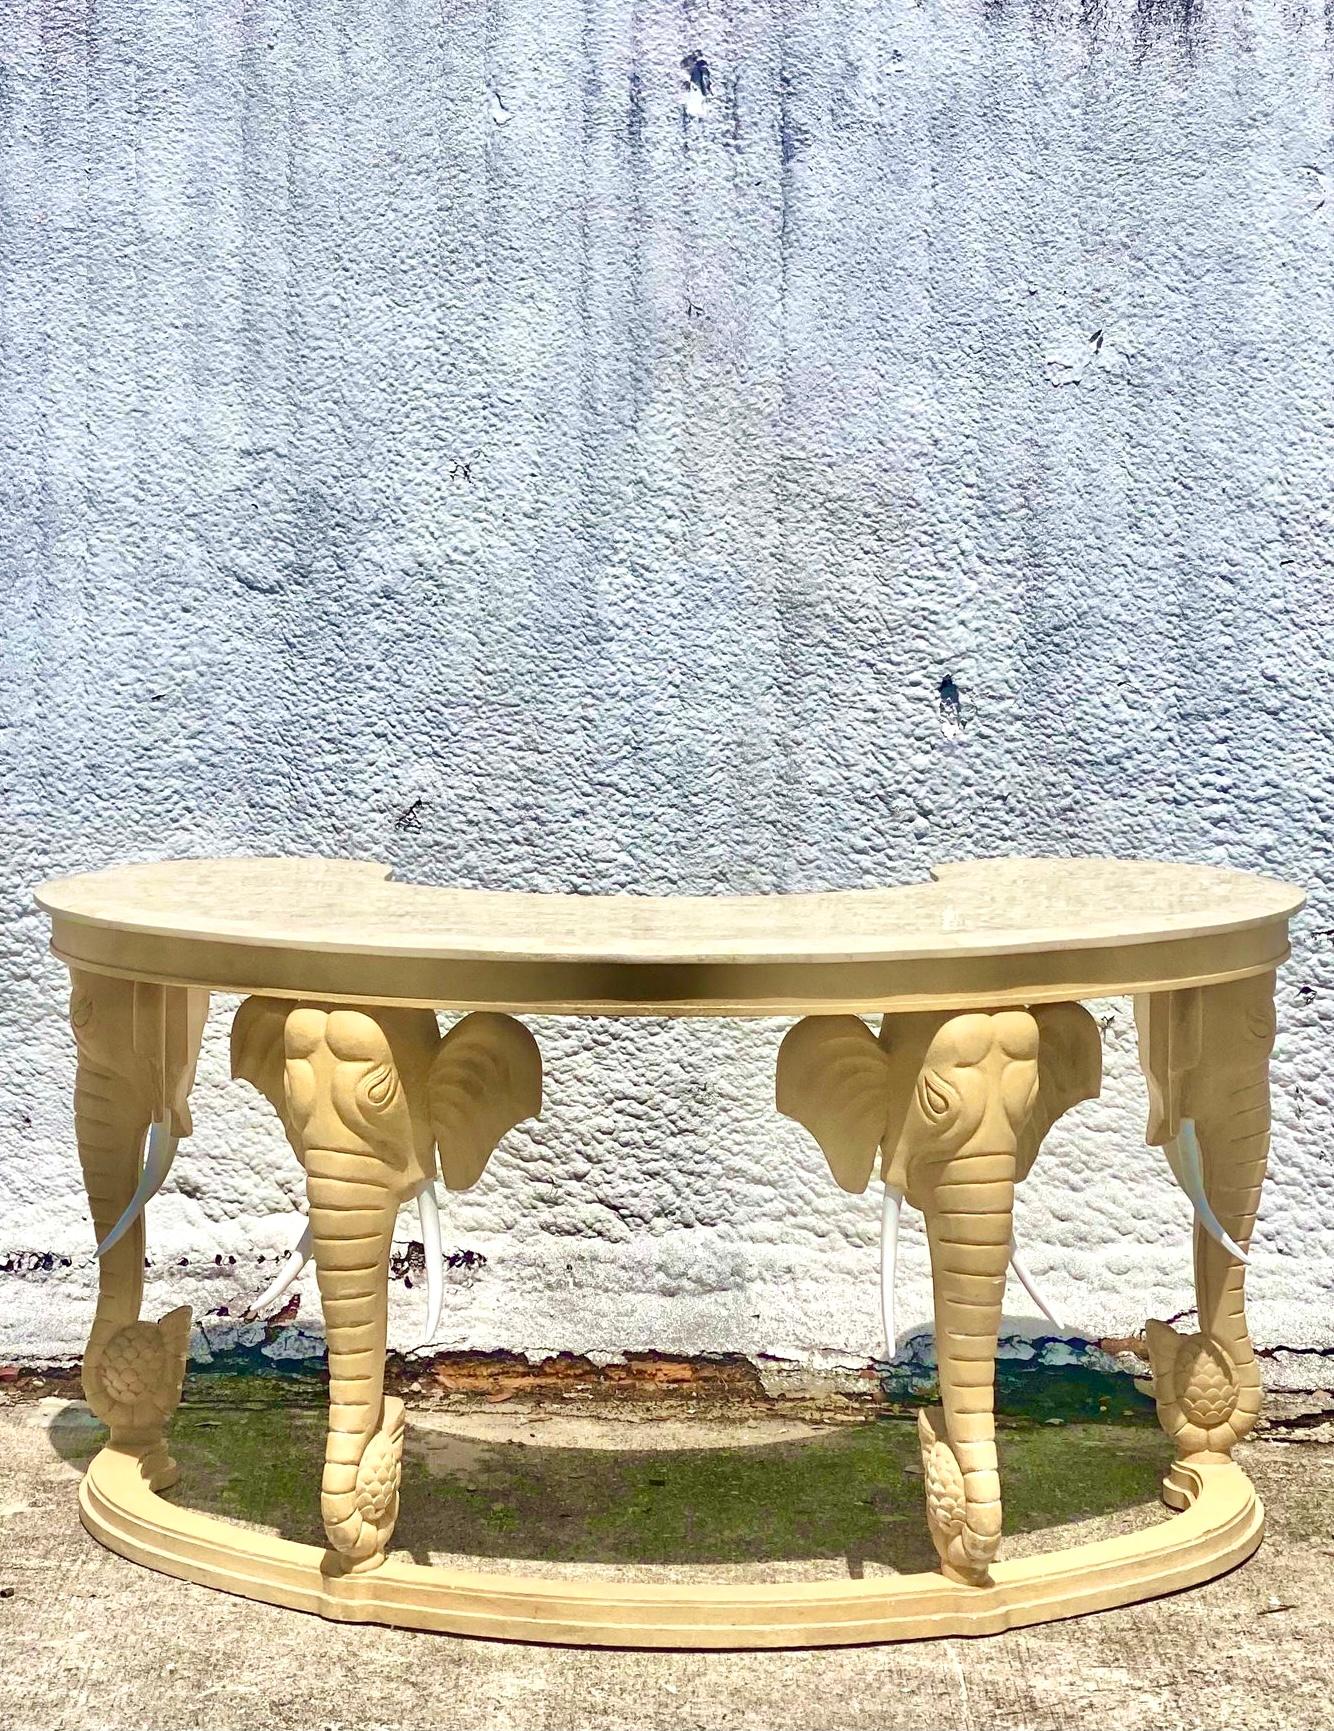 Vintage Regency writing desk and chair. Beautiful curved top with a tessellated stone surface. Striking matching chair. All tusks intact. Acquired from a Palm Beach estate.